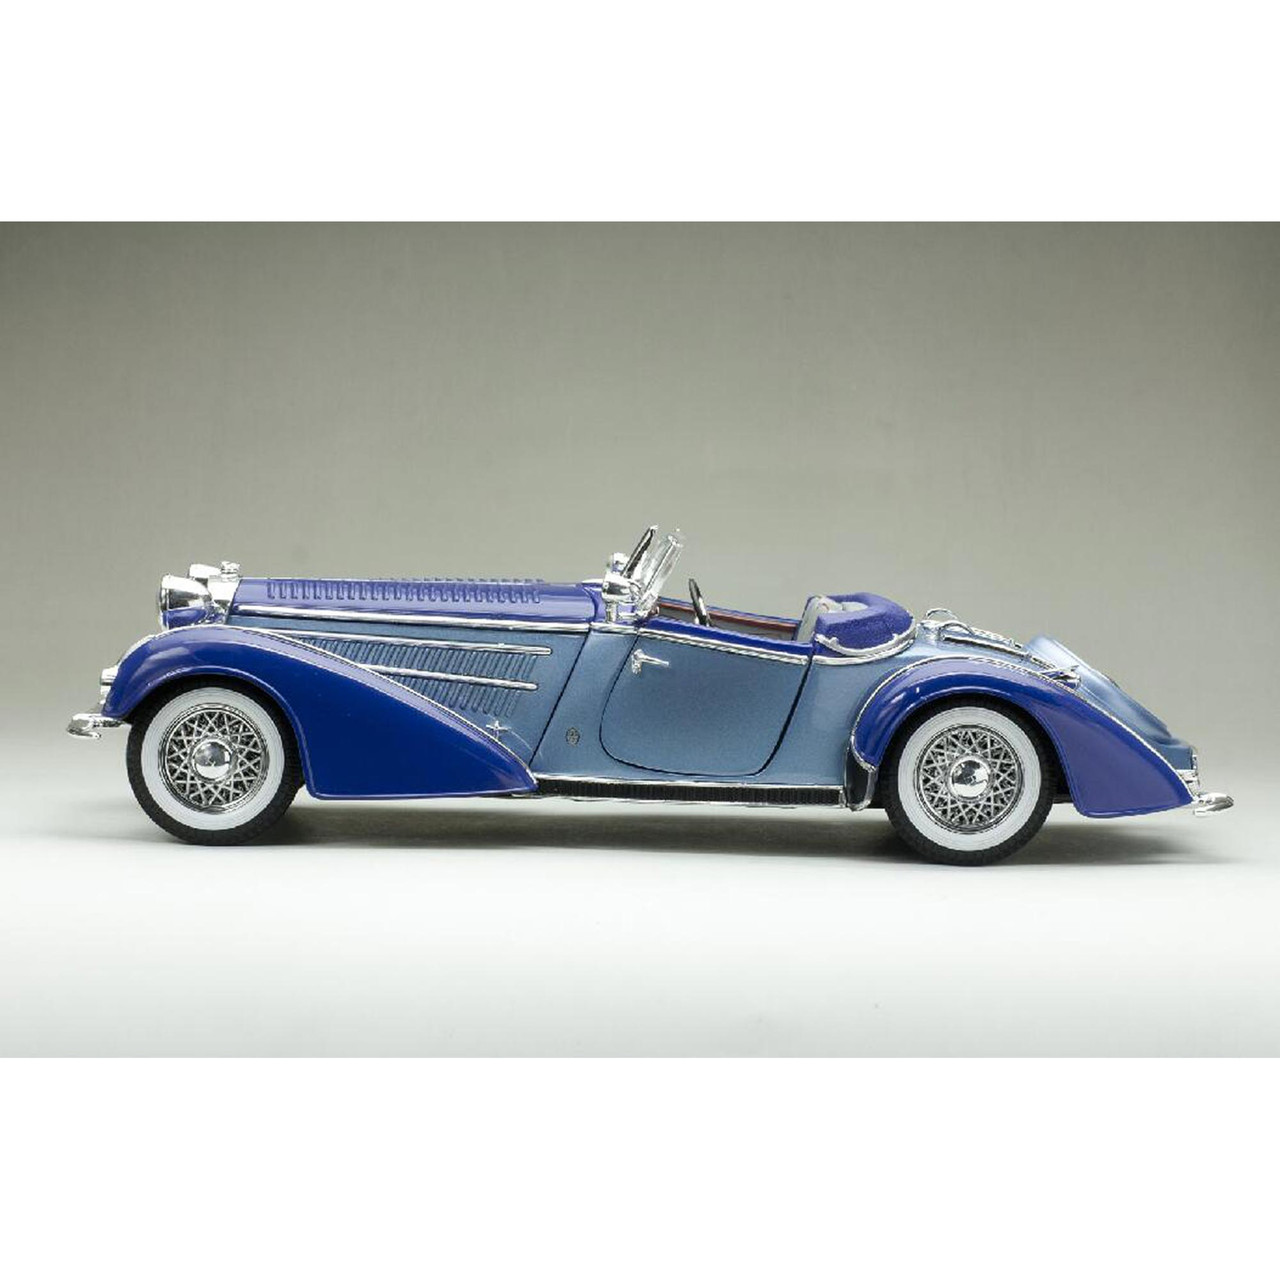 1939 Horch 855 Roadster - Blue 1:18 Scale Diecast Replica Model by Sunstar